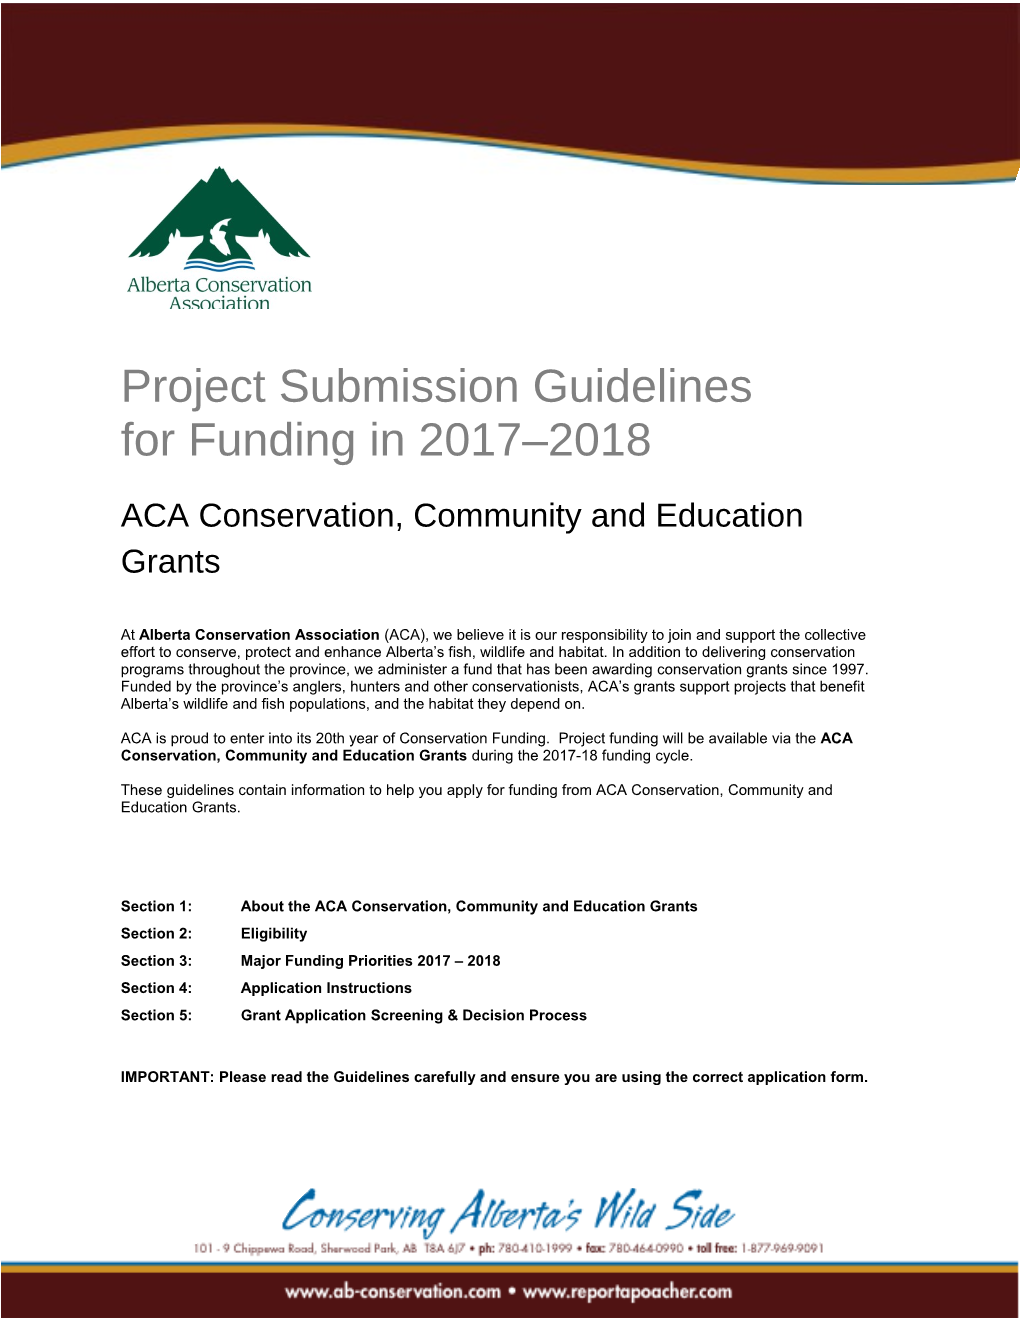 ACA Conservation, Community and Education Grants